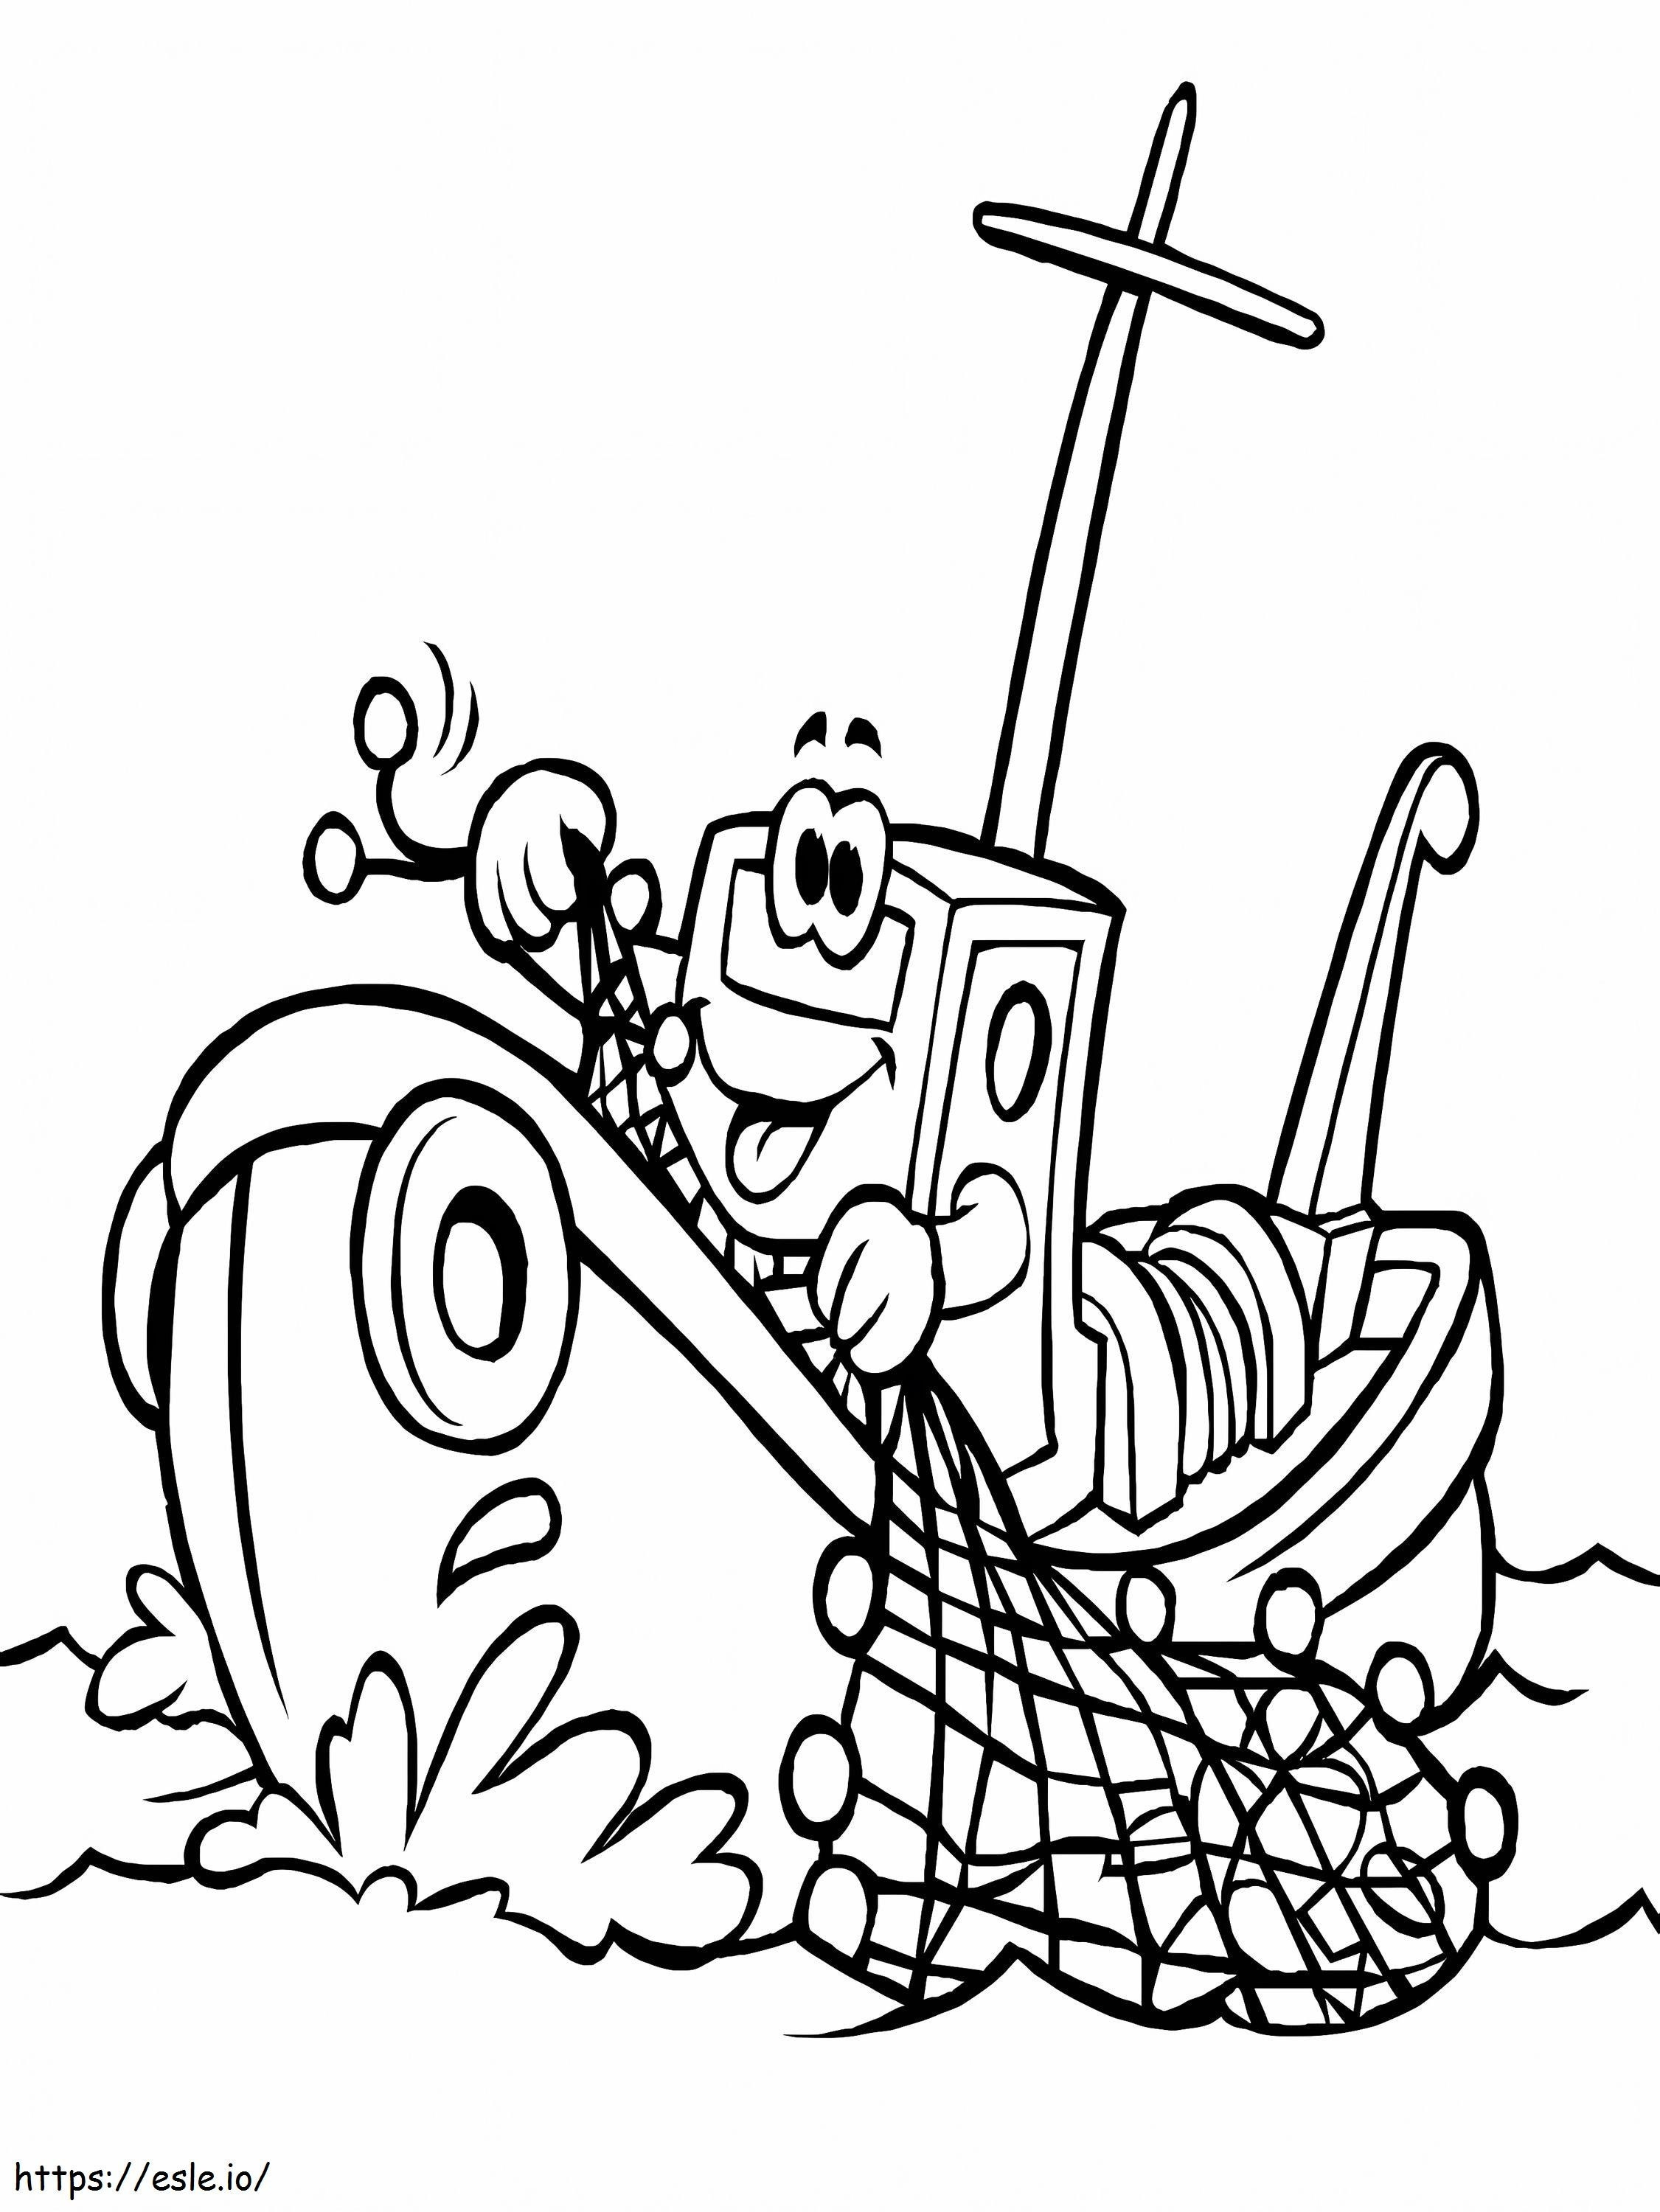 Boat3 Transportation coloring page